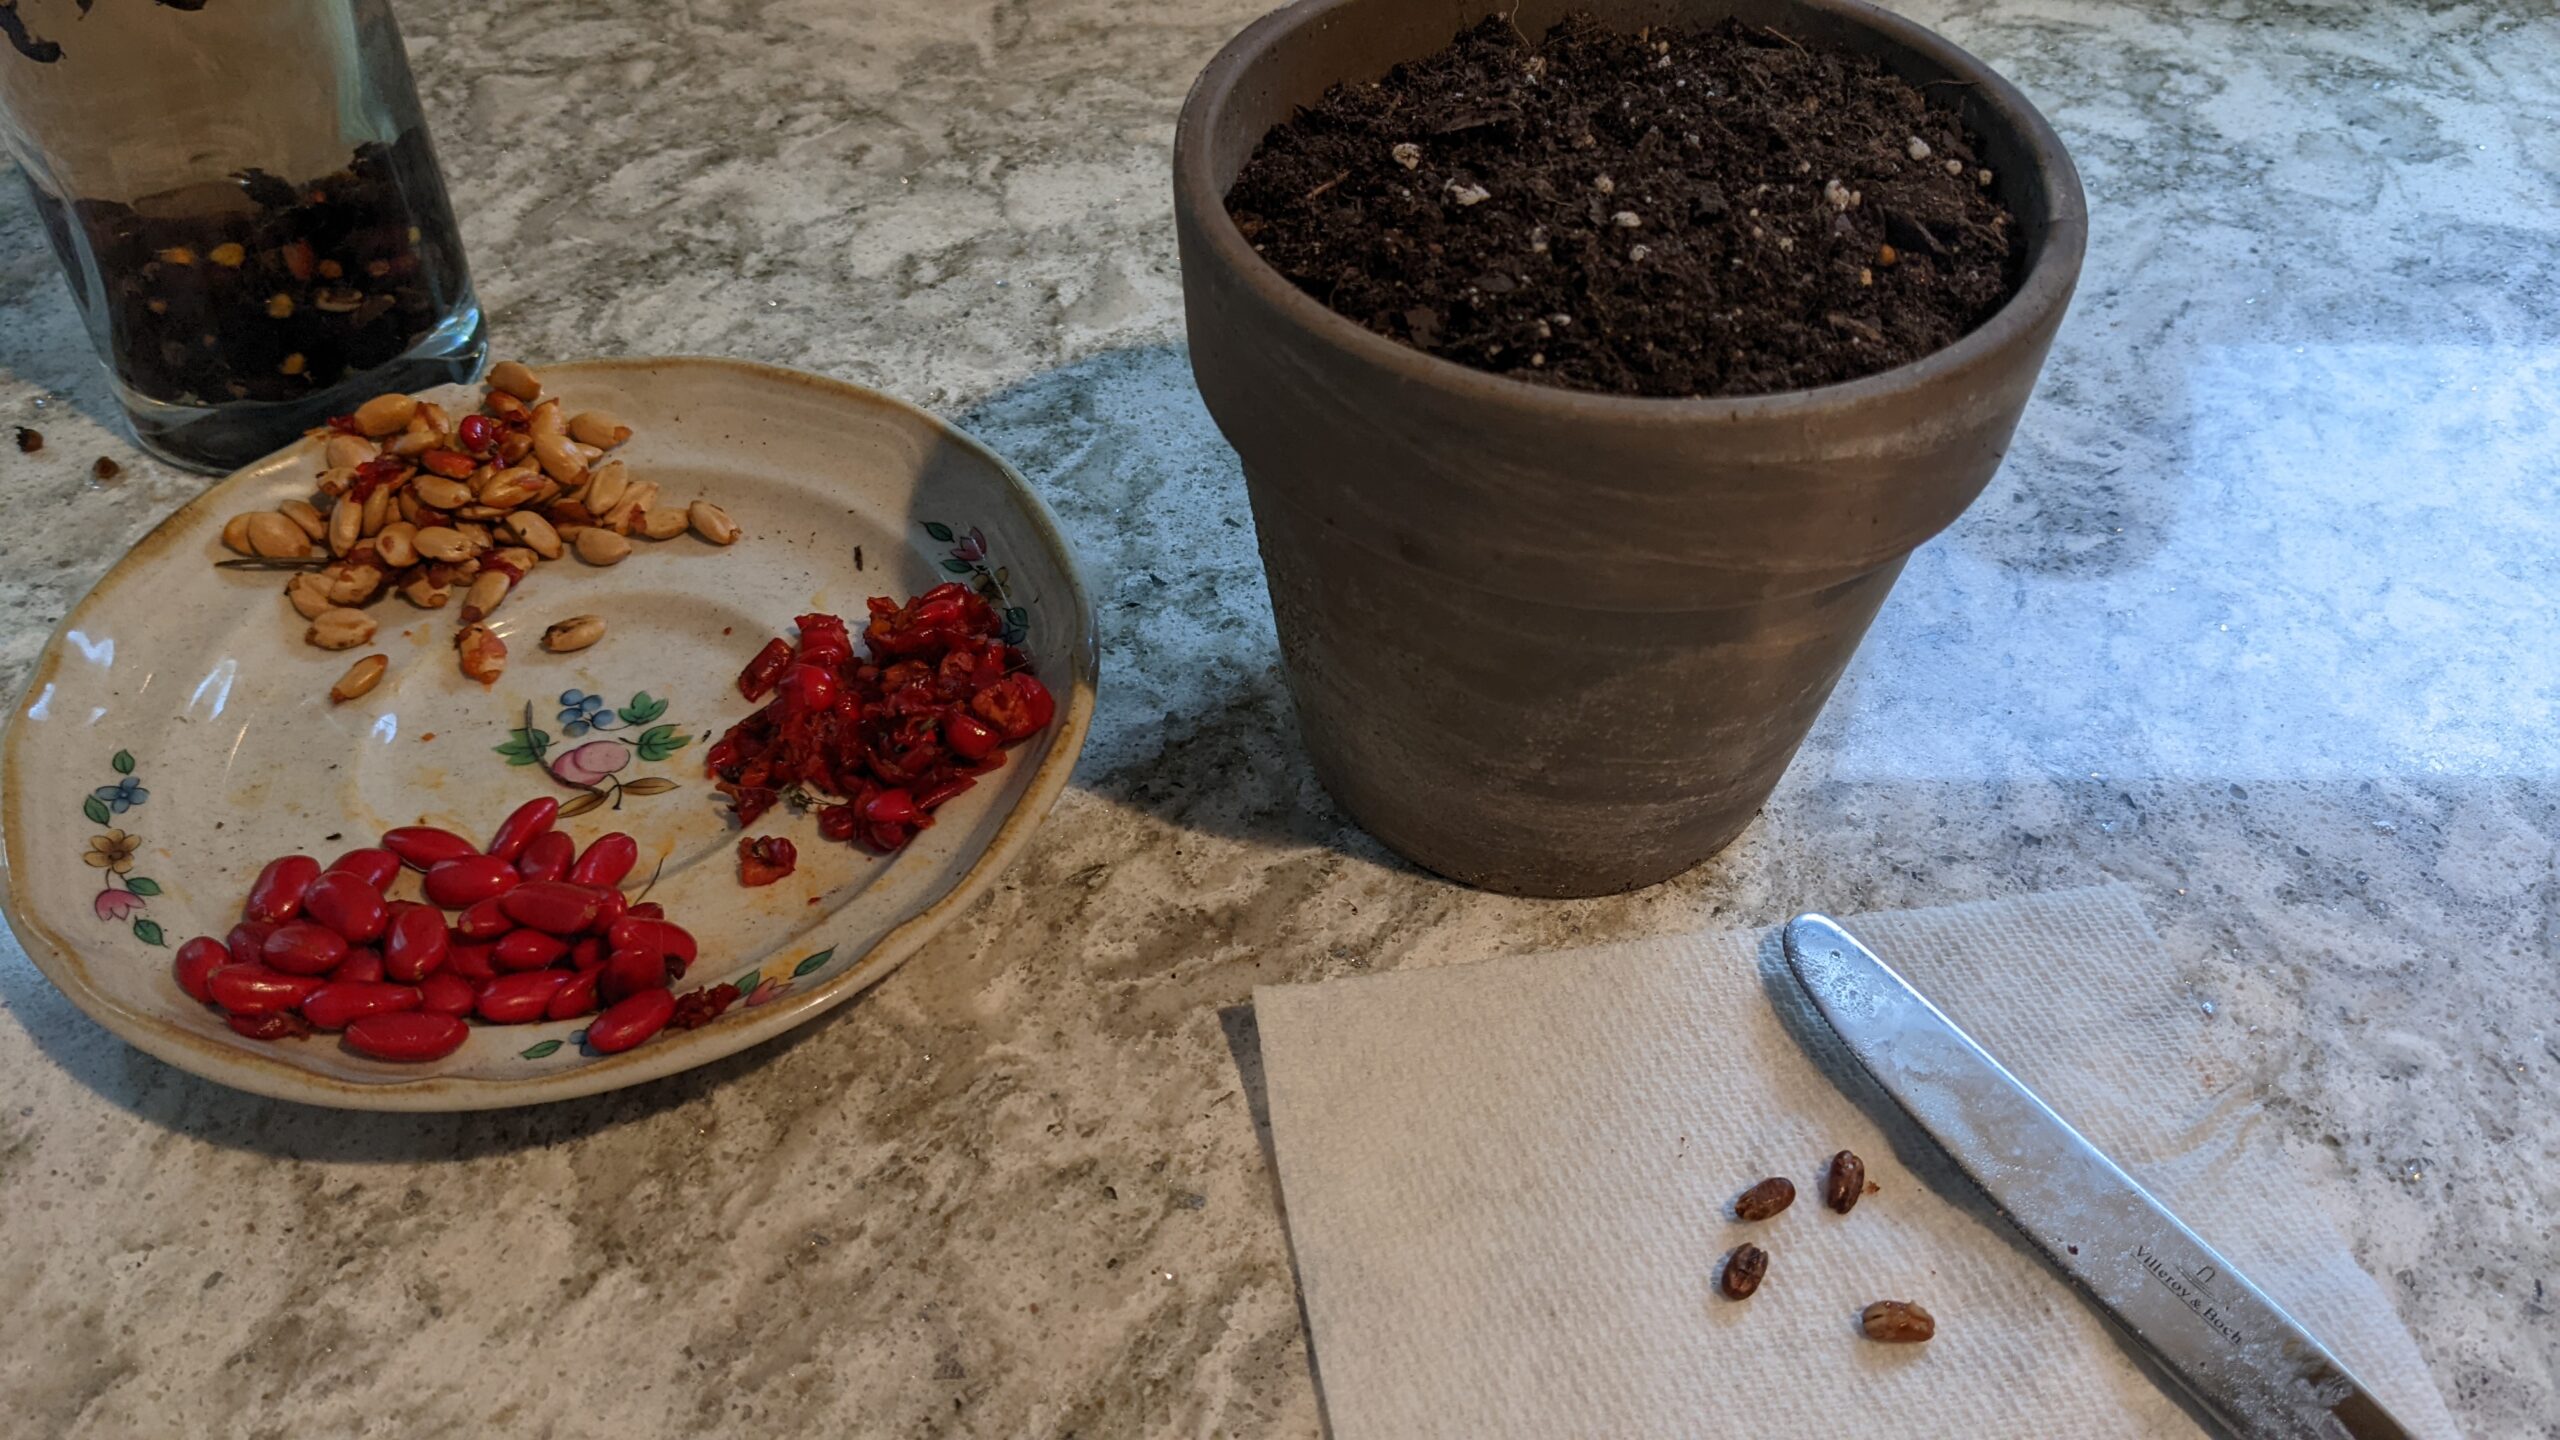 magnolia and pygmy date palm seeds